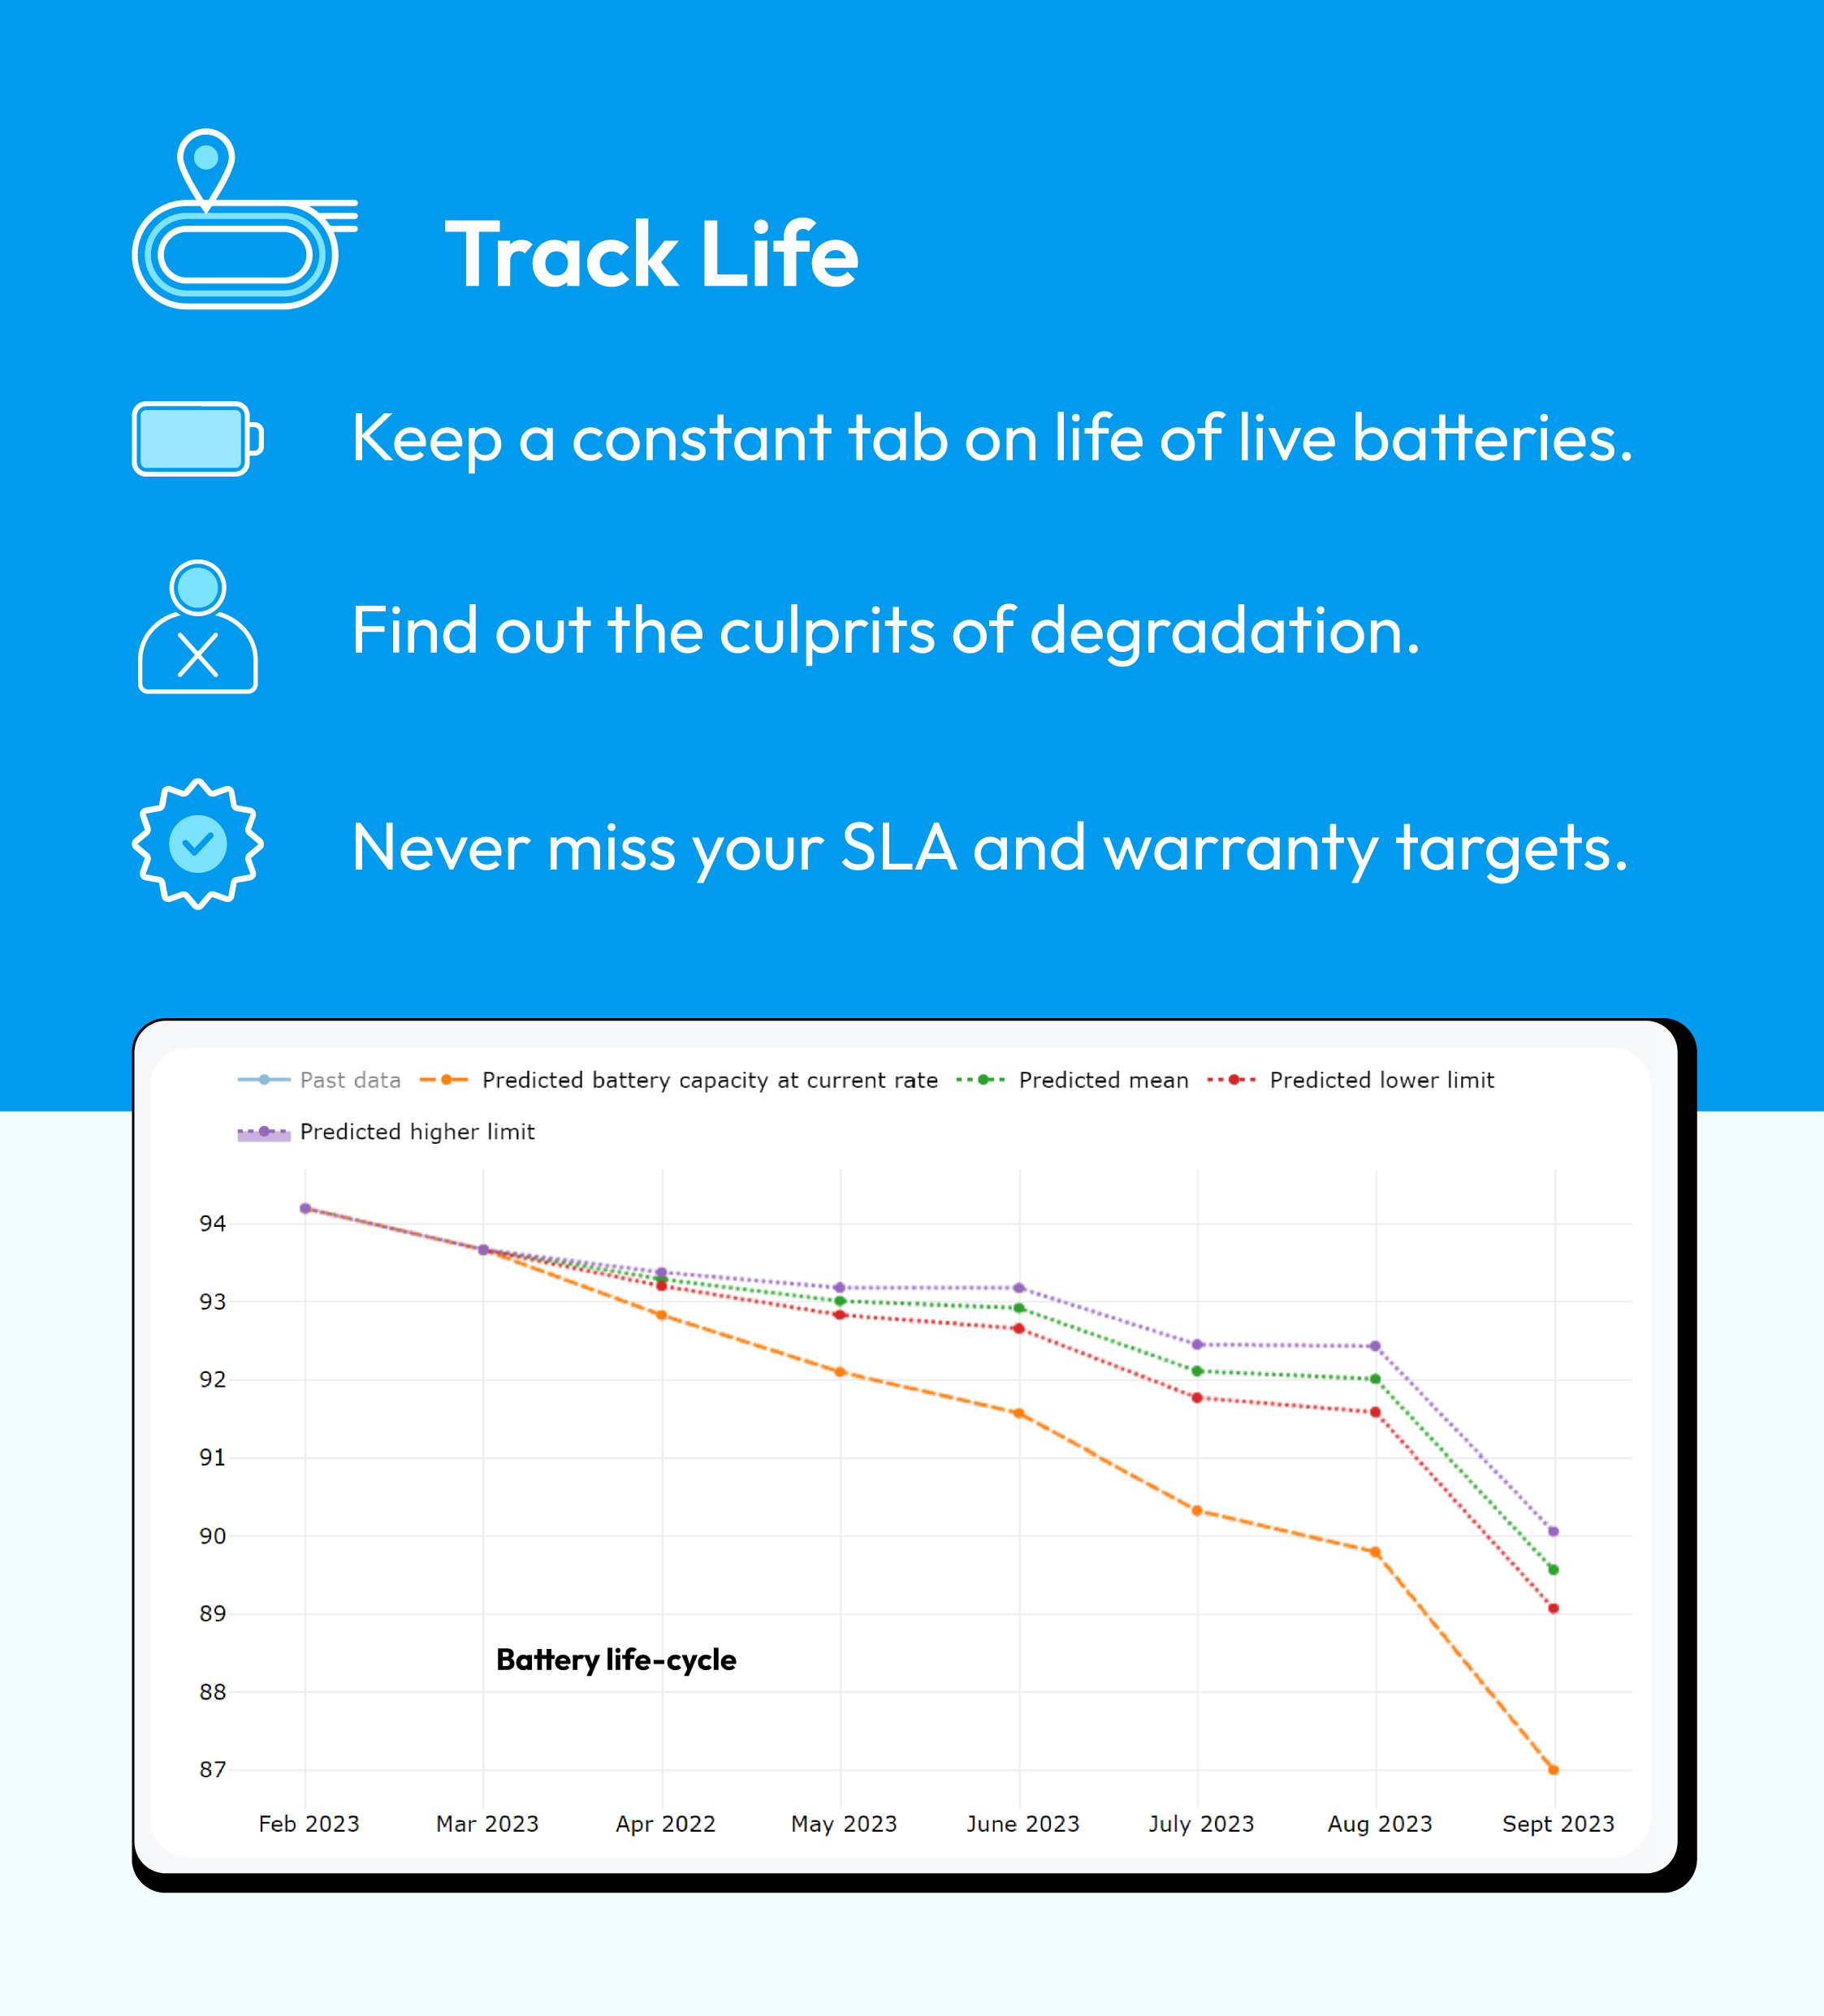 Track life : 1)- Keep a constant tab on life of live batteries. 2)- Find out the culprits of degradation. 3)- Never miss your SLA and warranty targets.